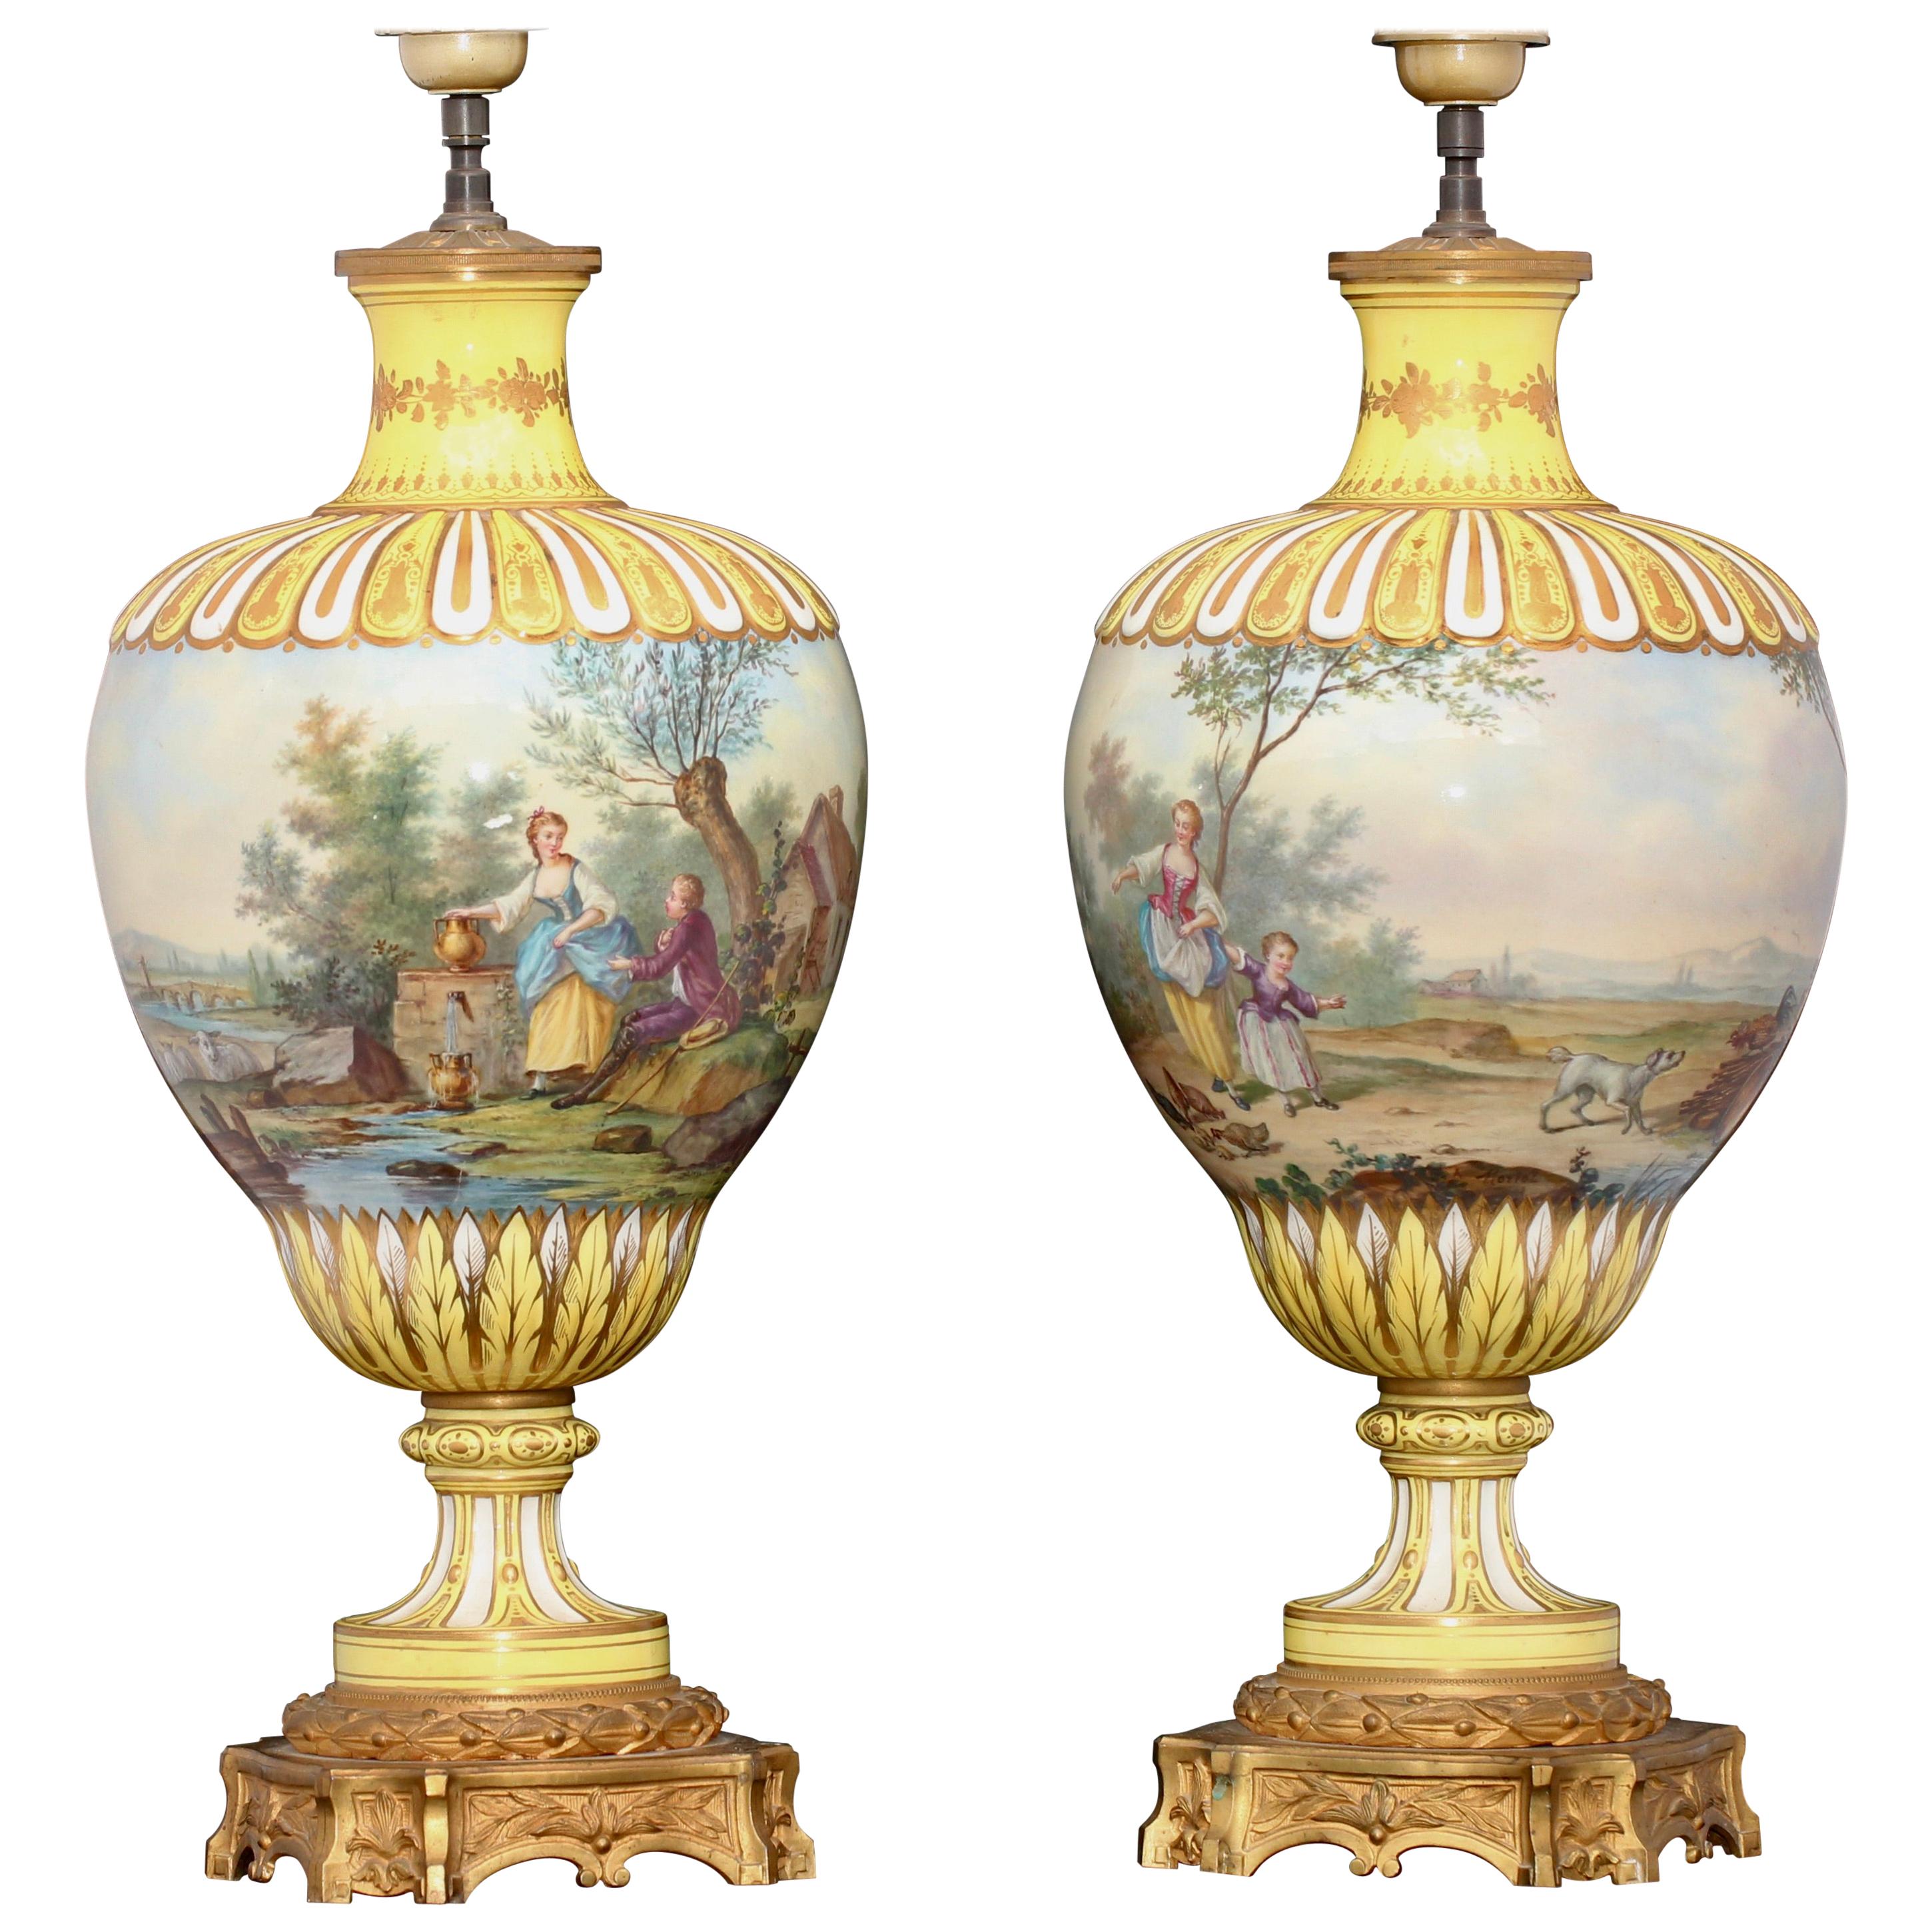 Pair of Napoléon III Polychromed Porcelain Vases Ormolu-Mounted in Lamps